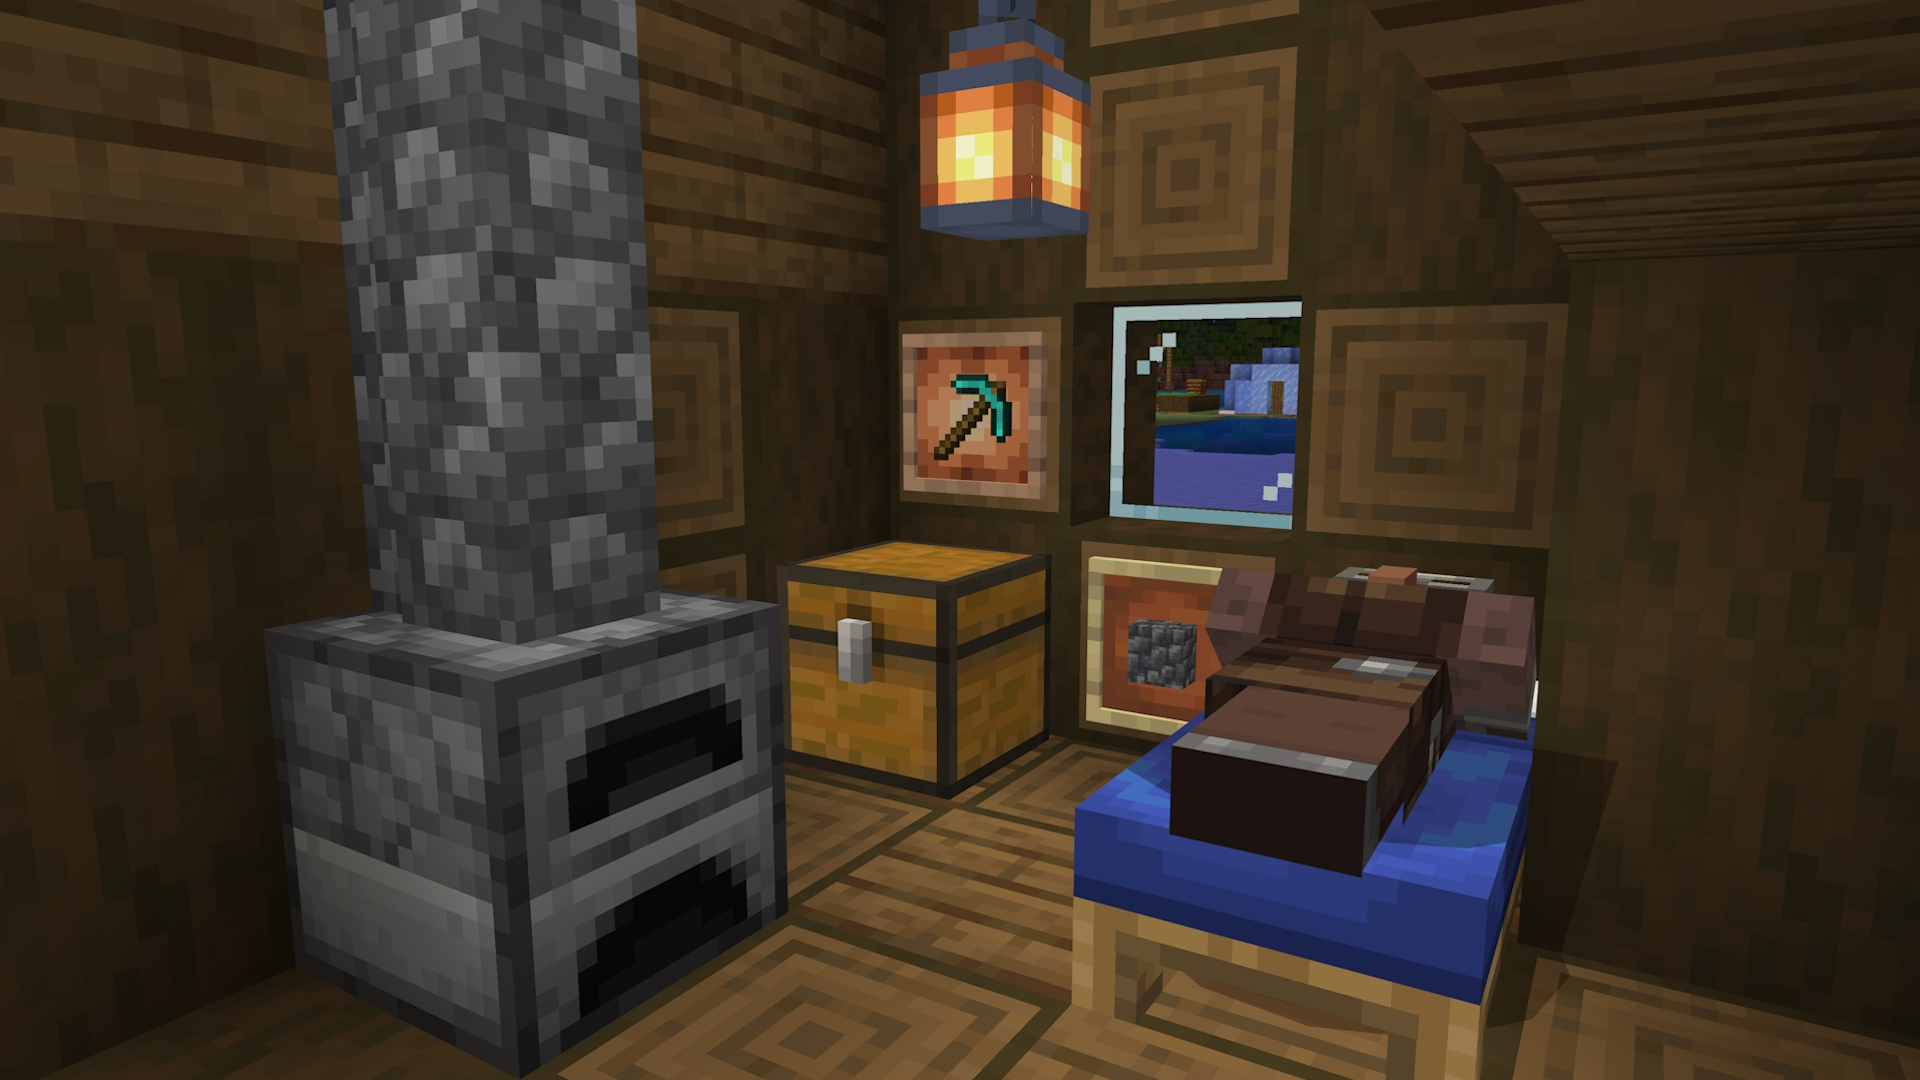 A Minecraft screenshot of a villager sleeping in a bed, in a room with a furnace and a chest. There is a pickaxe and a block of cobble deepslate placed in item frames.